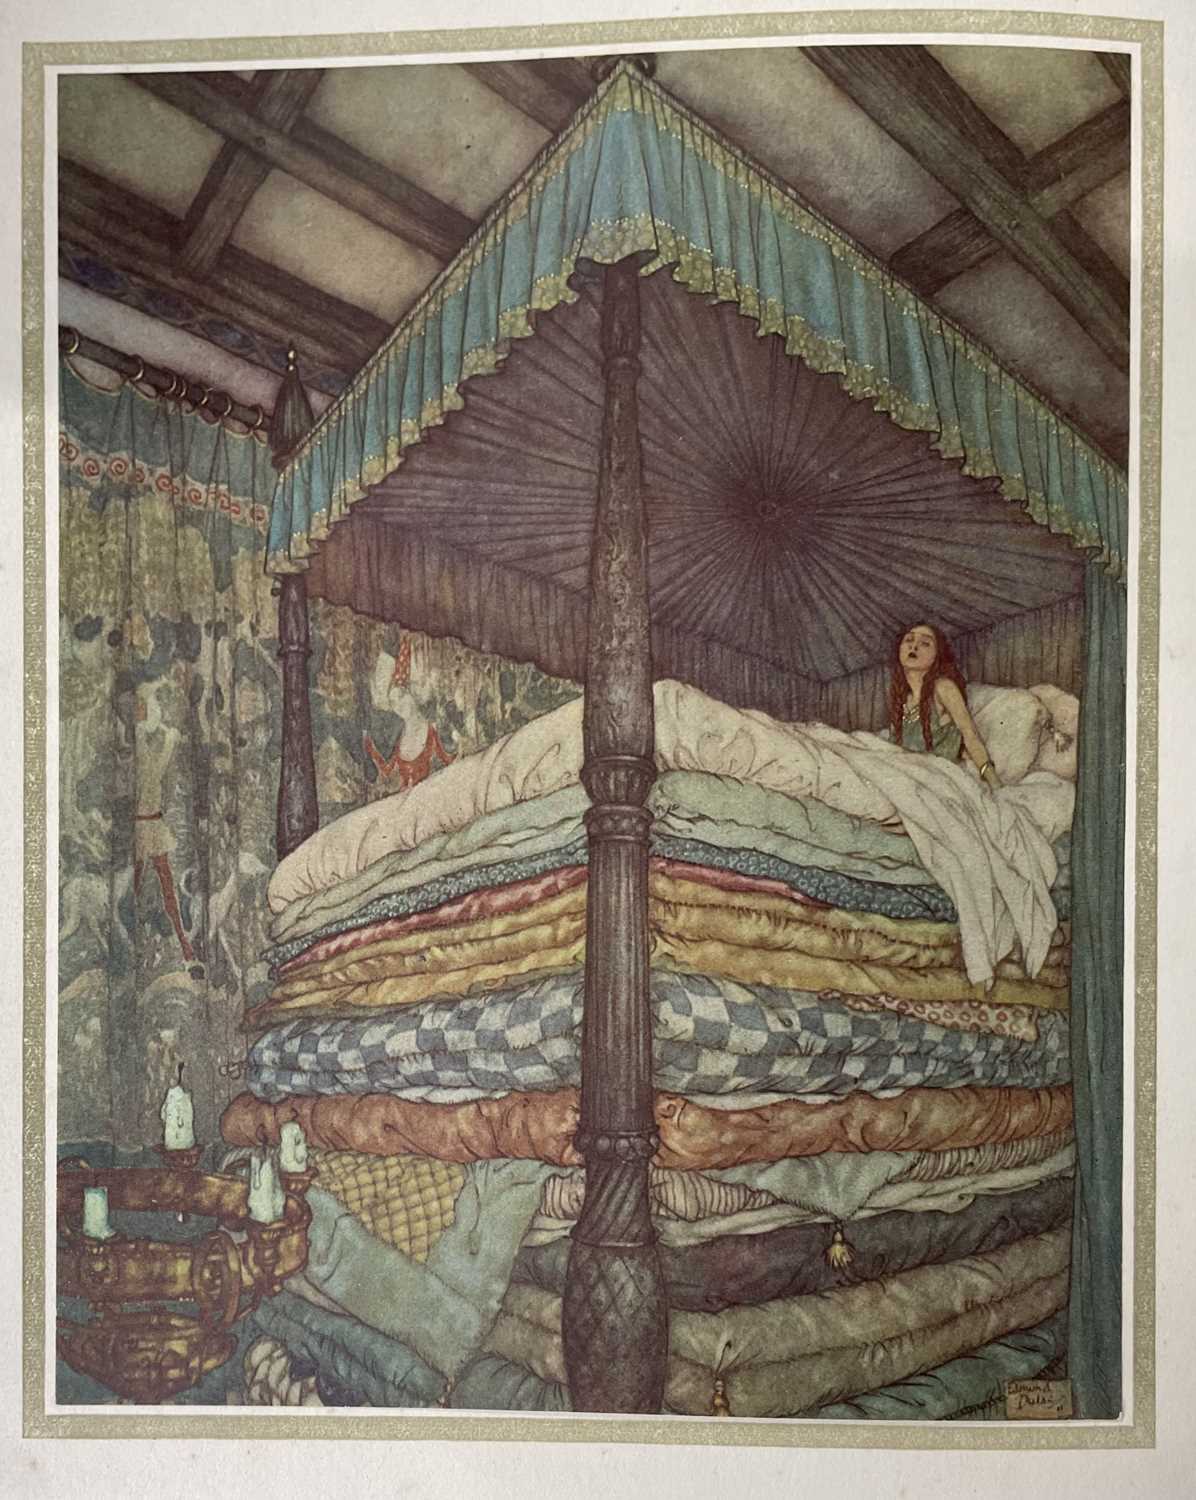 EDMUND DULAC (ILLUS): STORIES FROM HANS ANDERSEN, London, Hodder and Stoughton, 1911. First edition. - Image 3 of 3